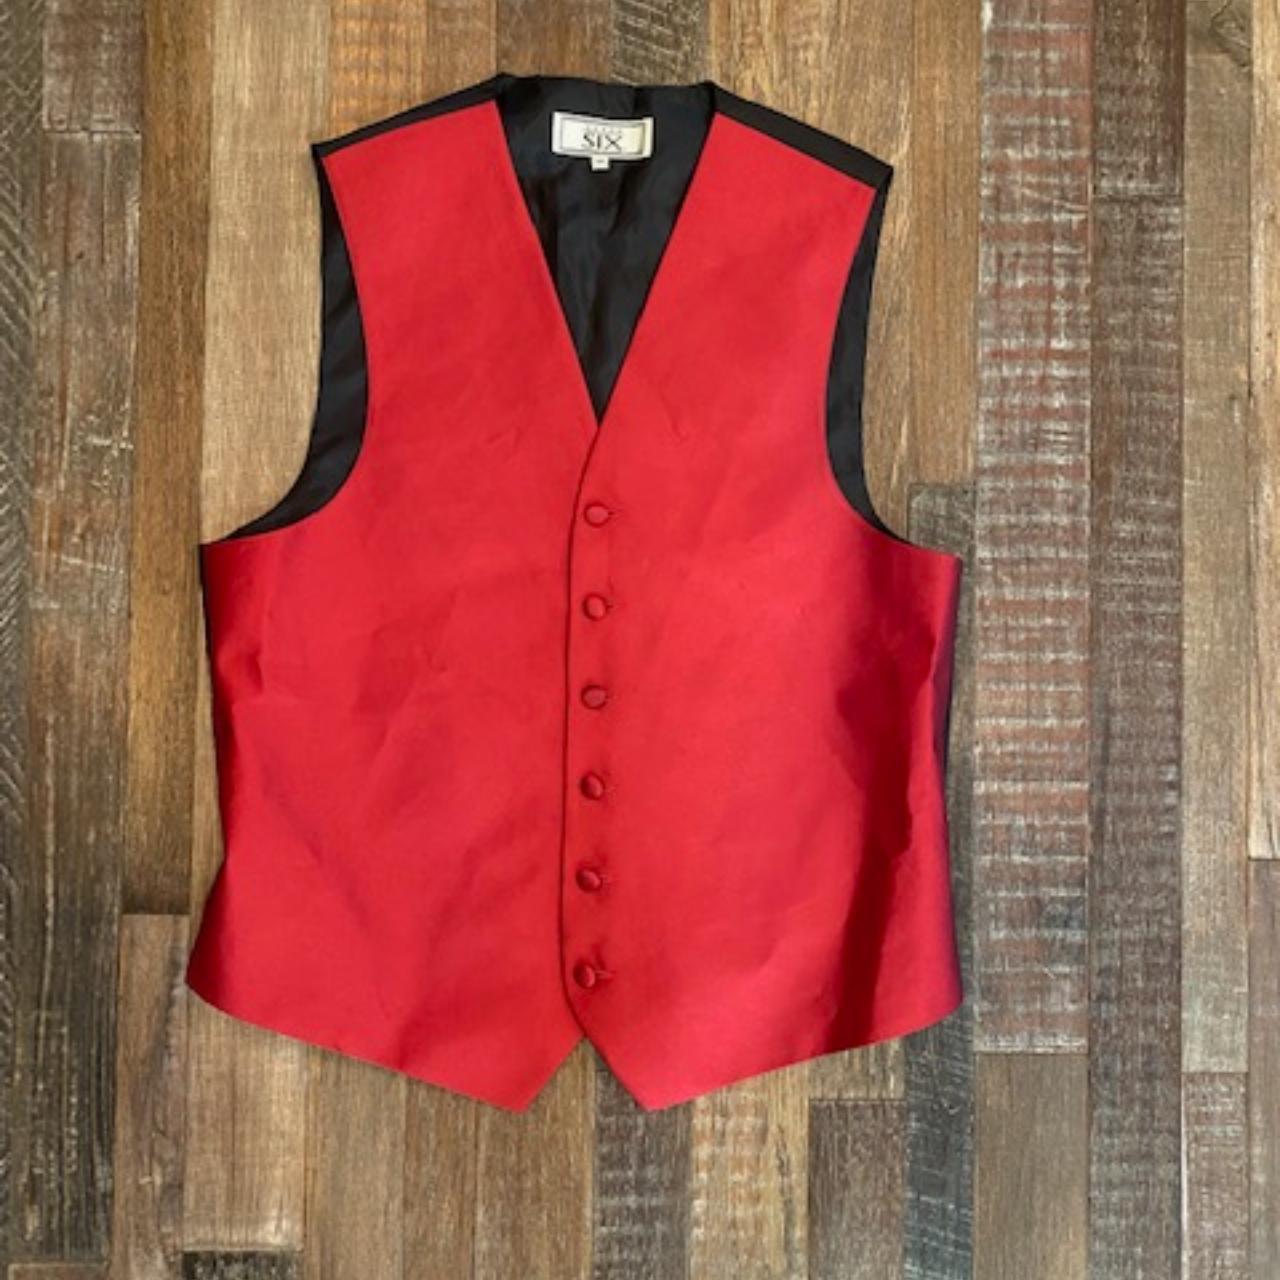 After Six Men's Black and Red Gilet